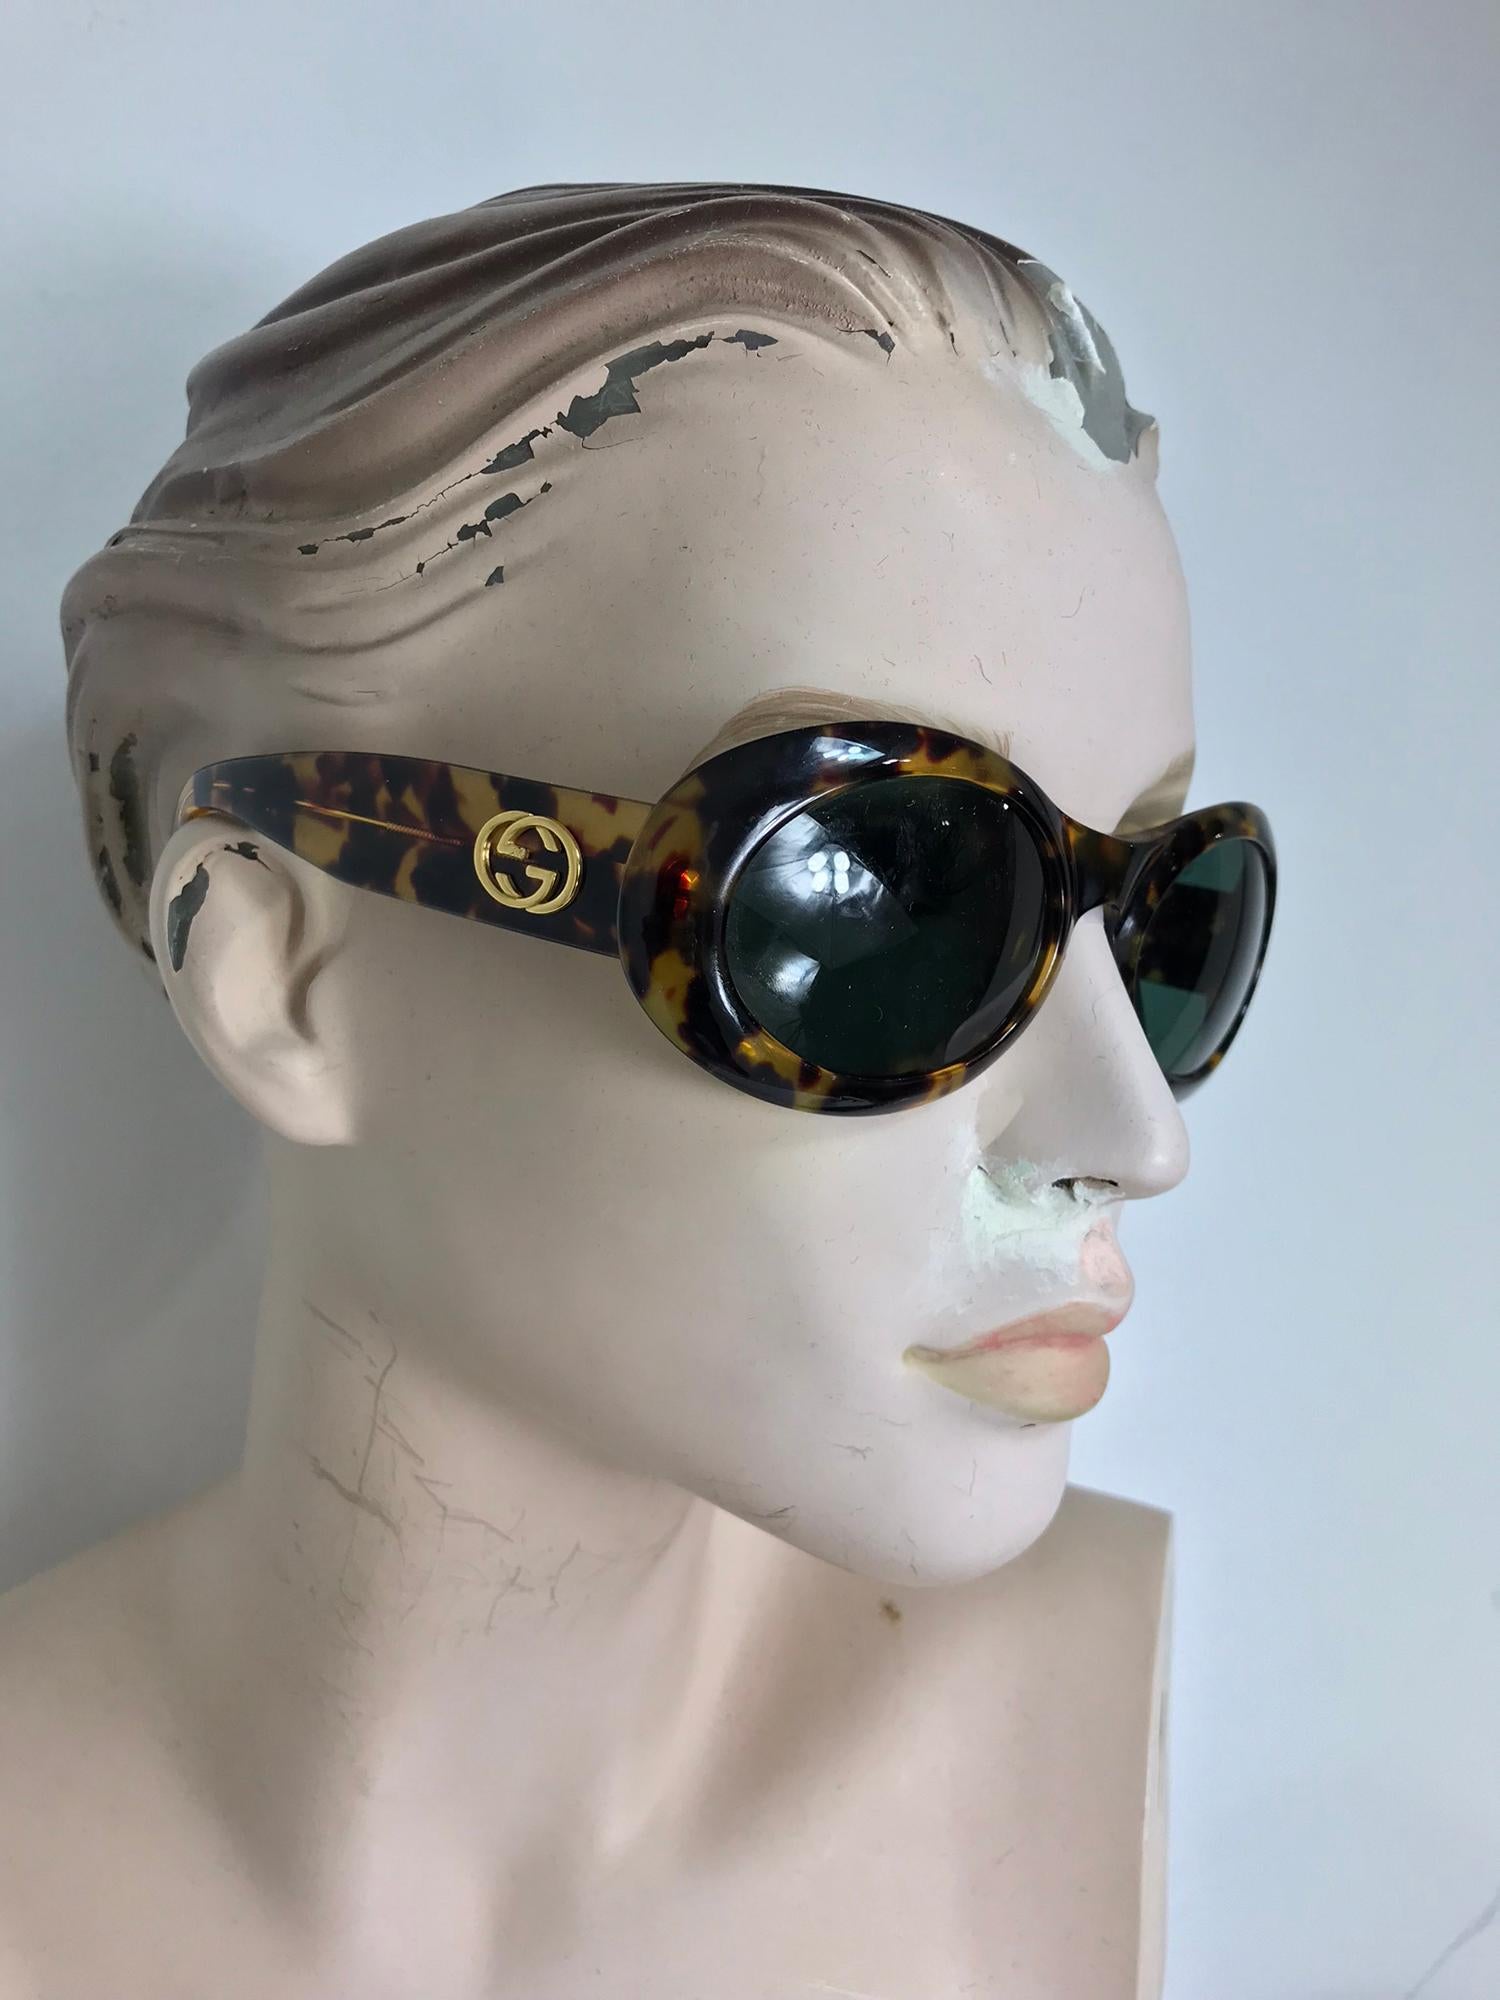 Vintage Gucci tortoise shell sunglasses with the original leather case from the 1970s.
6 1/2 front center side to side
2 high each side
5 side piece
3/4 side high at widest 
 case 7 1/2 long
3 1/2 wide